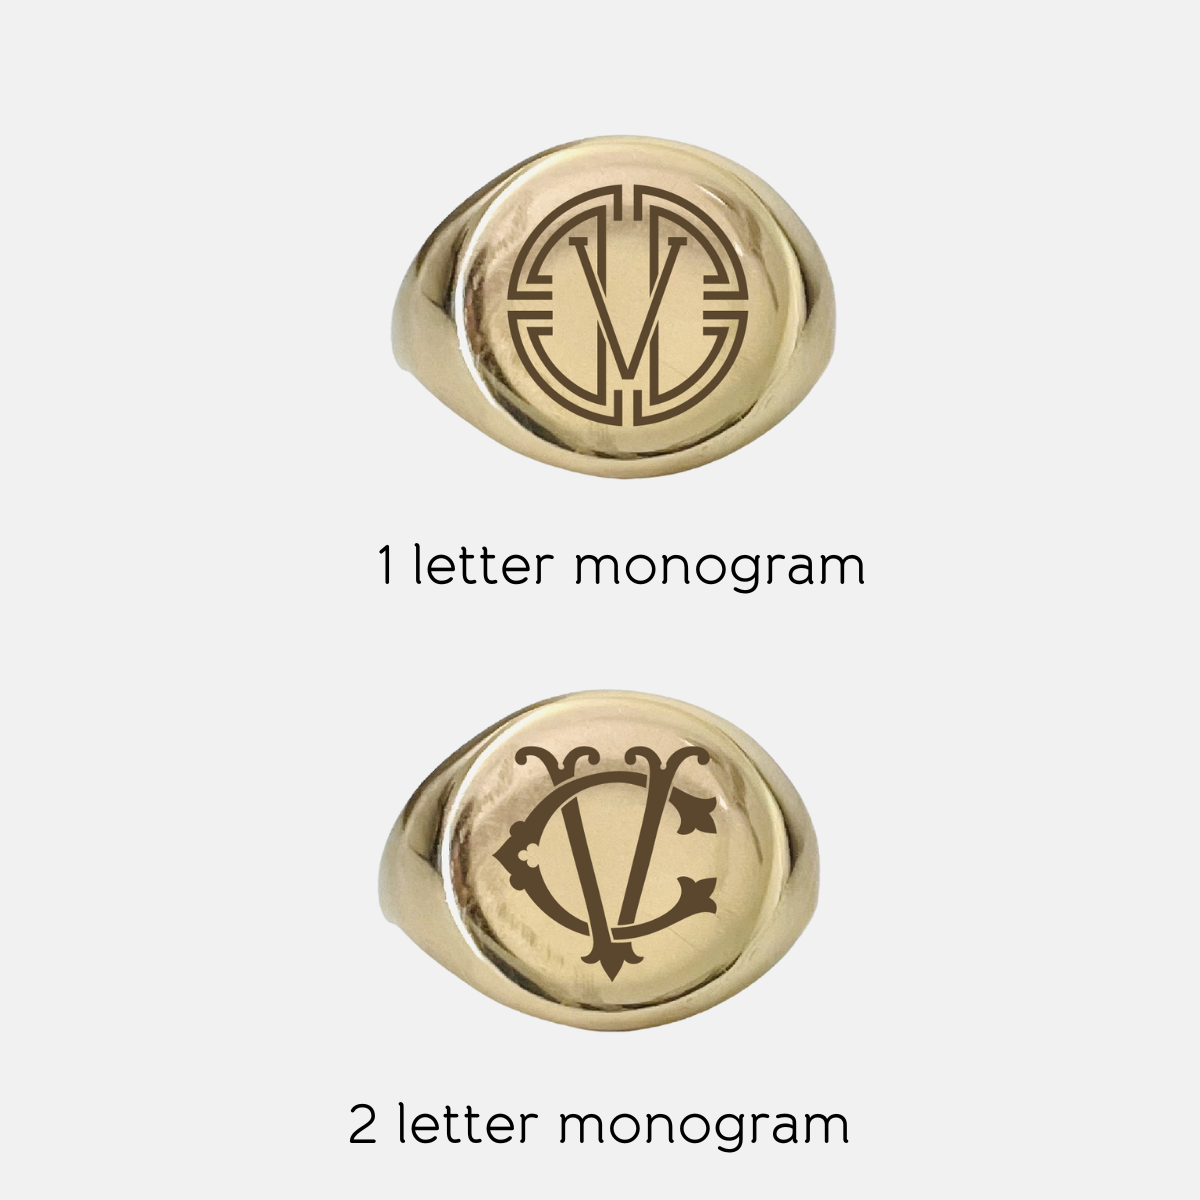 The Legacy Signet Ring